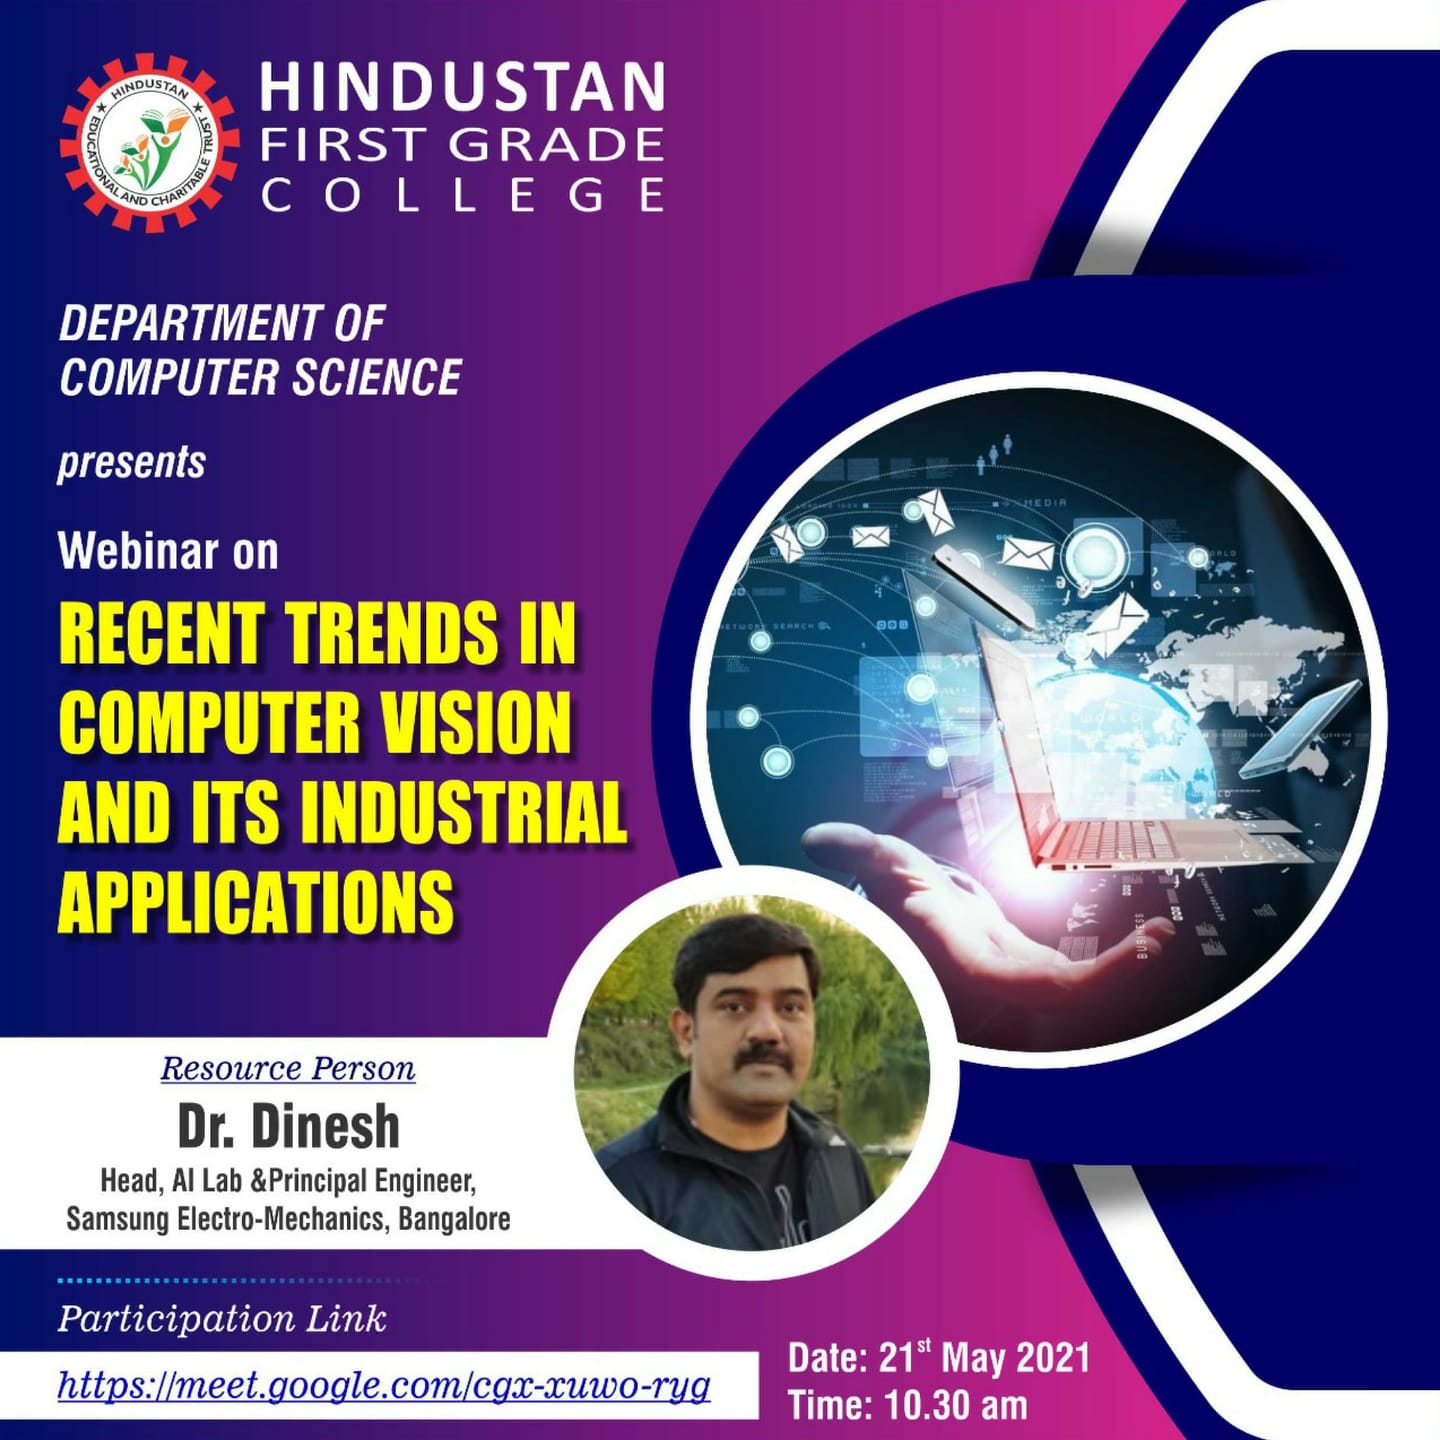 WEBINAR on “RECENT TRENDS IN COMPUTER VISION AND ITS INDUSTRIAL APPLICATIONS”